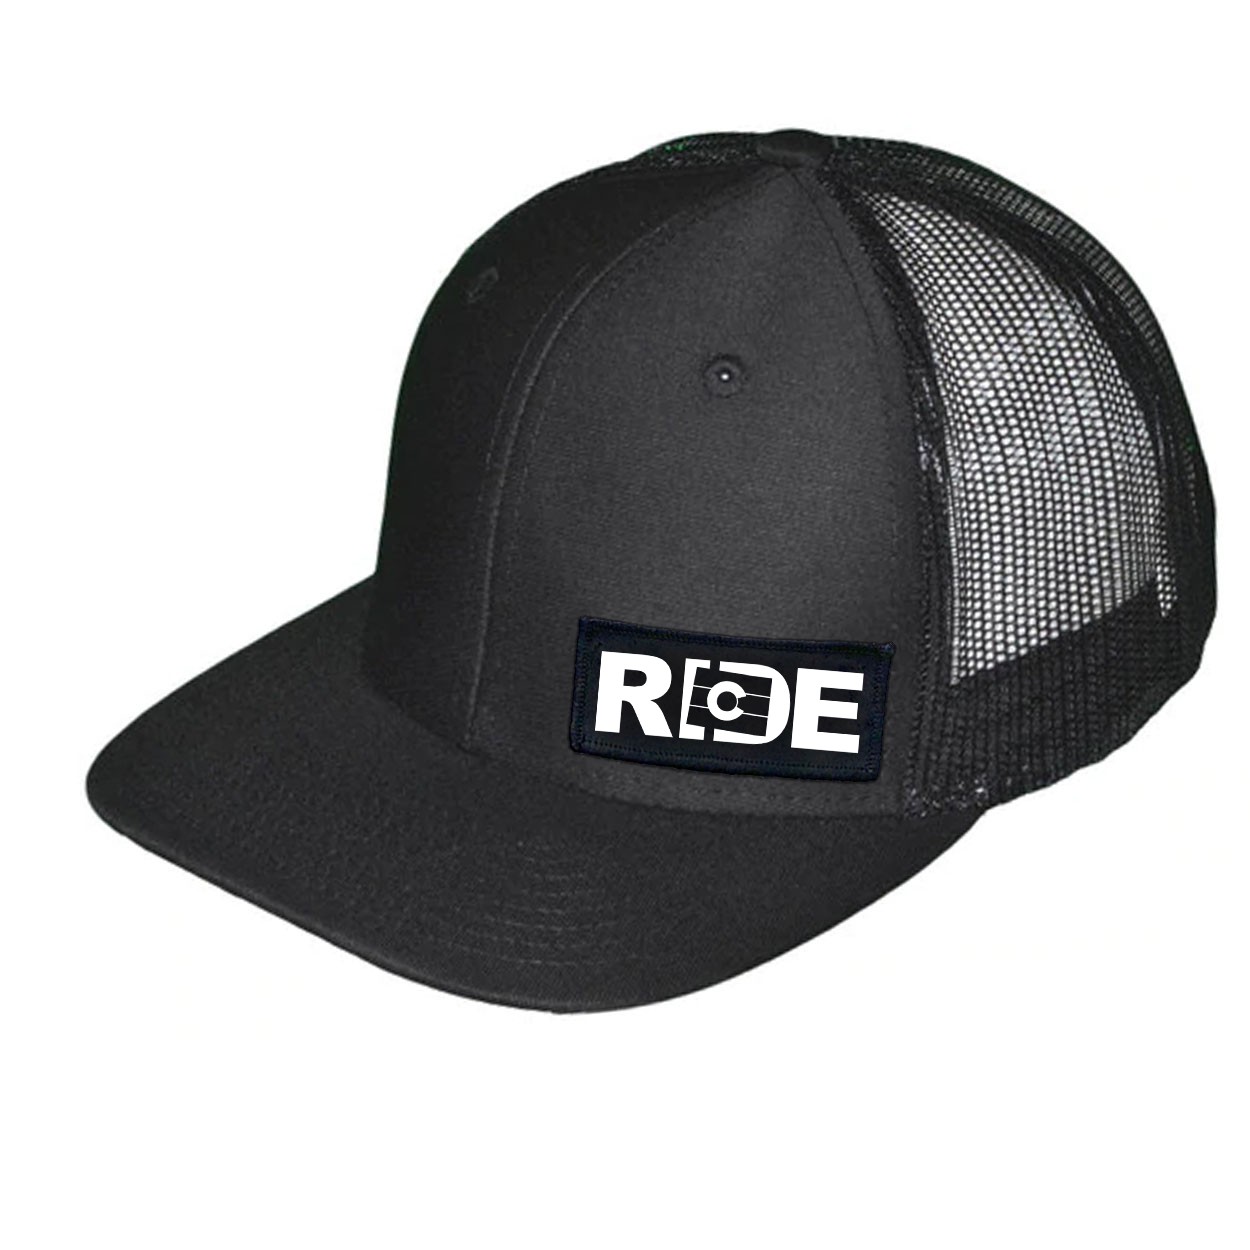 Ride Colorado Night Out Woven Patch Snapback Trucker Hat Black (White Logo)